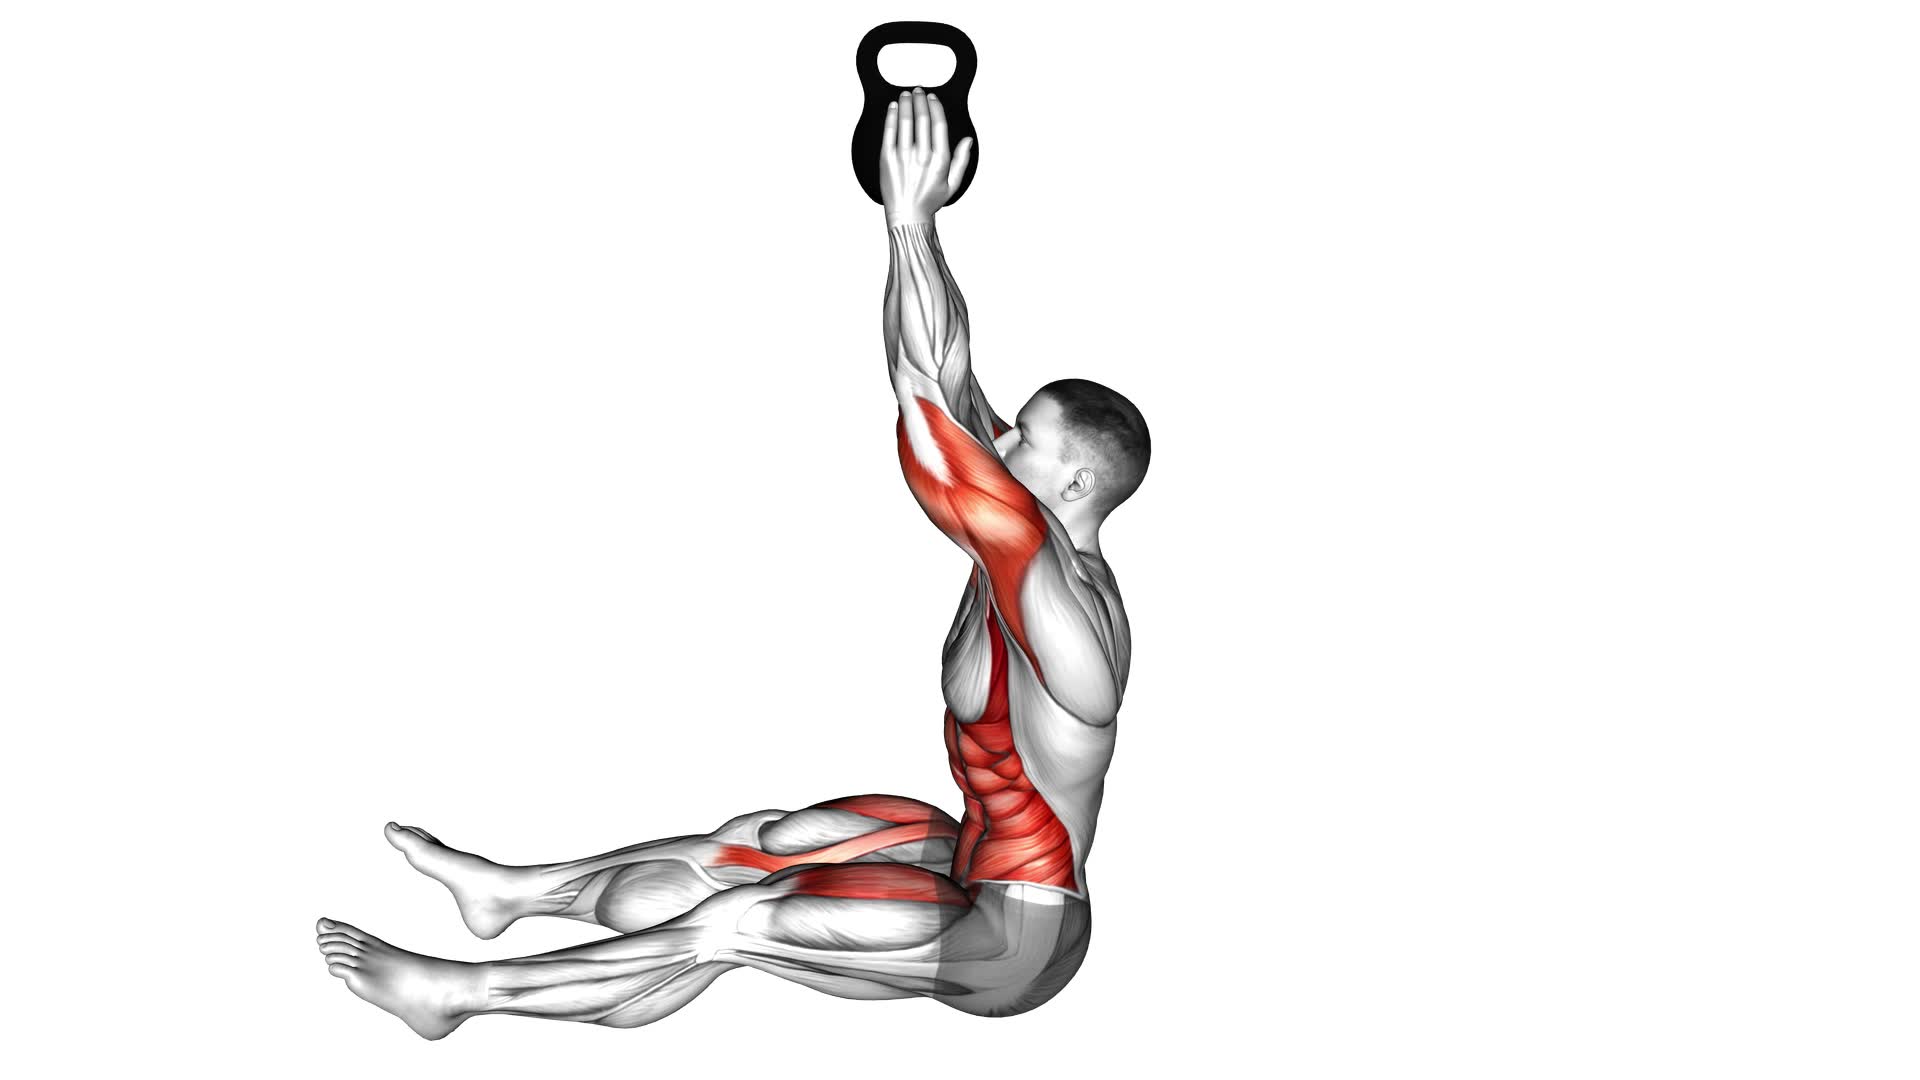 Kettlebell Sit-up Press - Video Exercise Guide & Tips